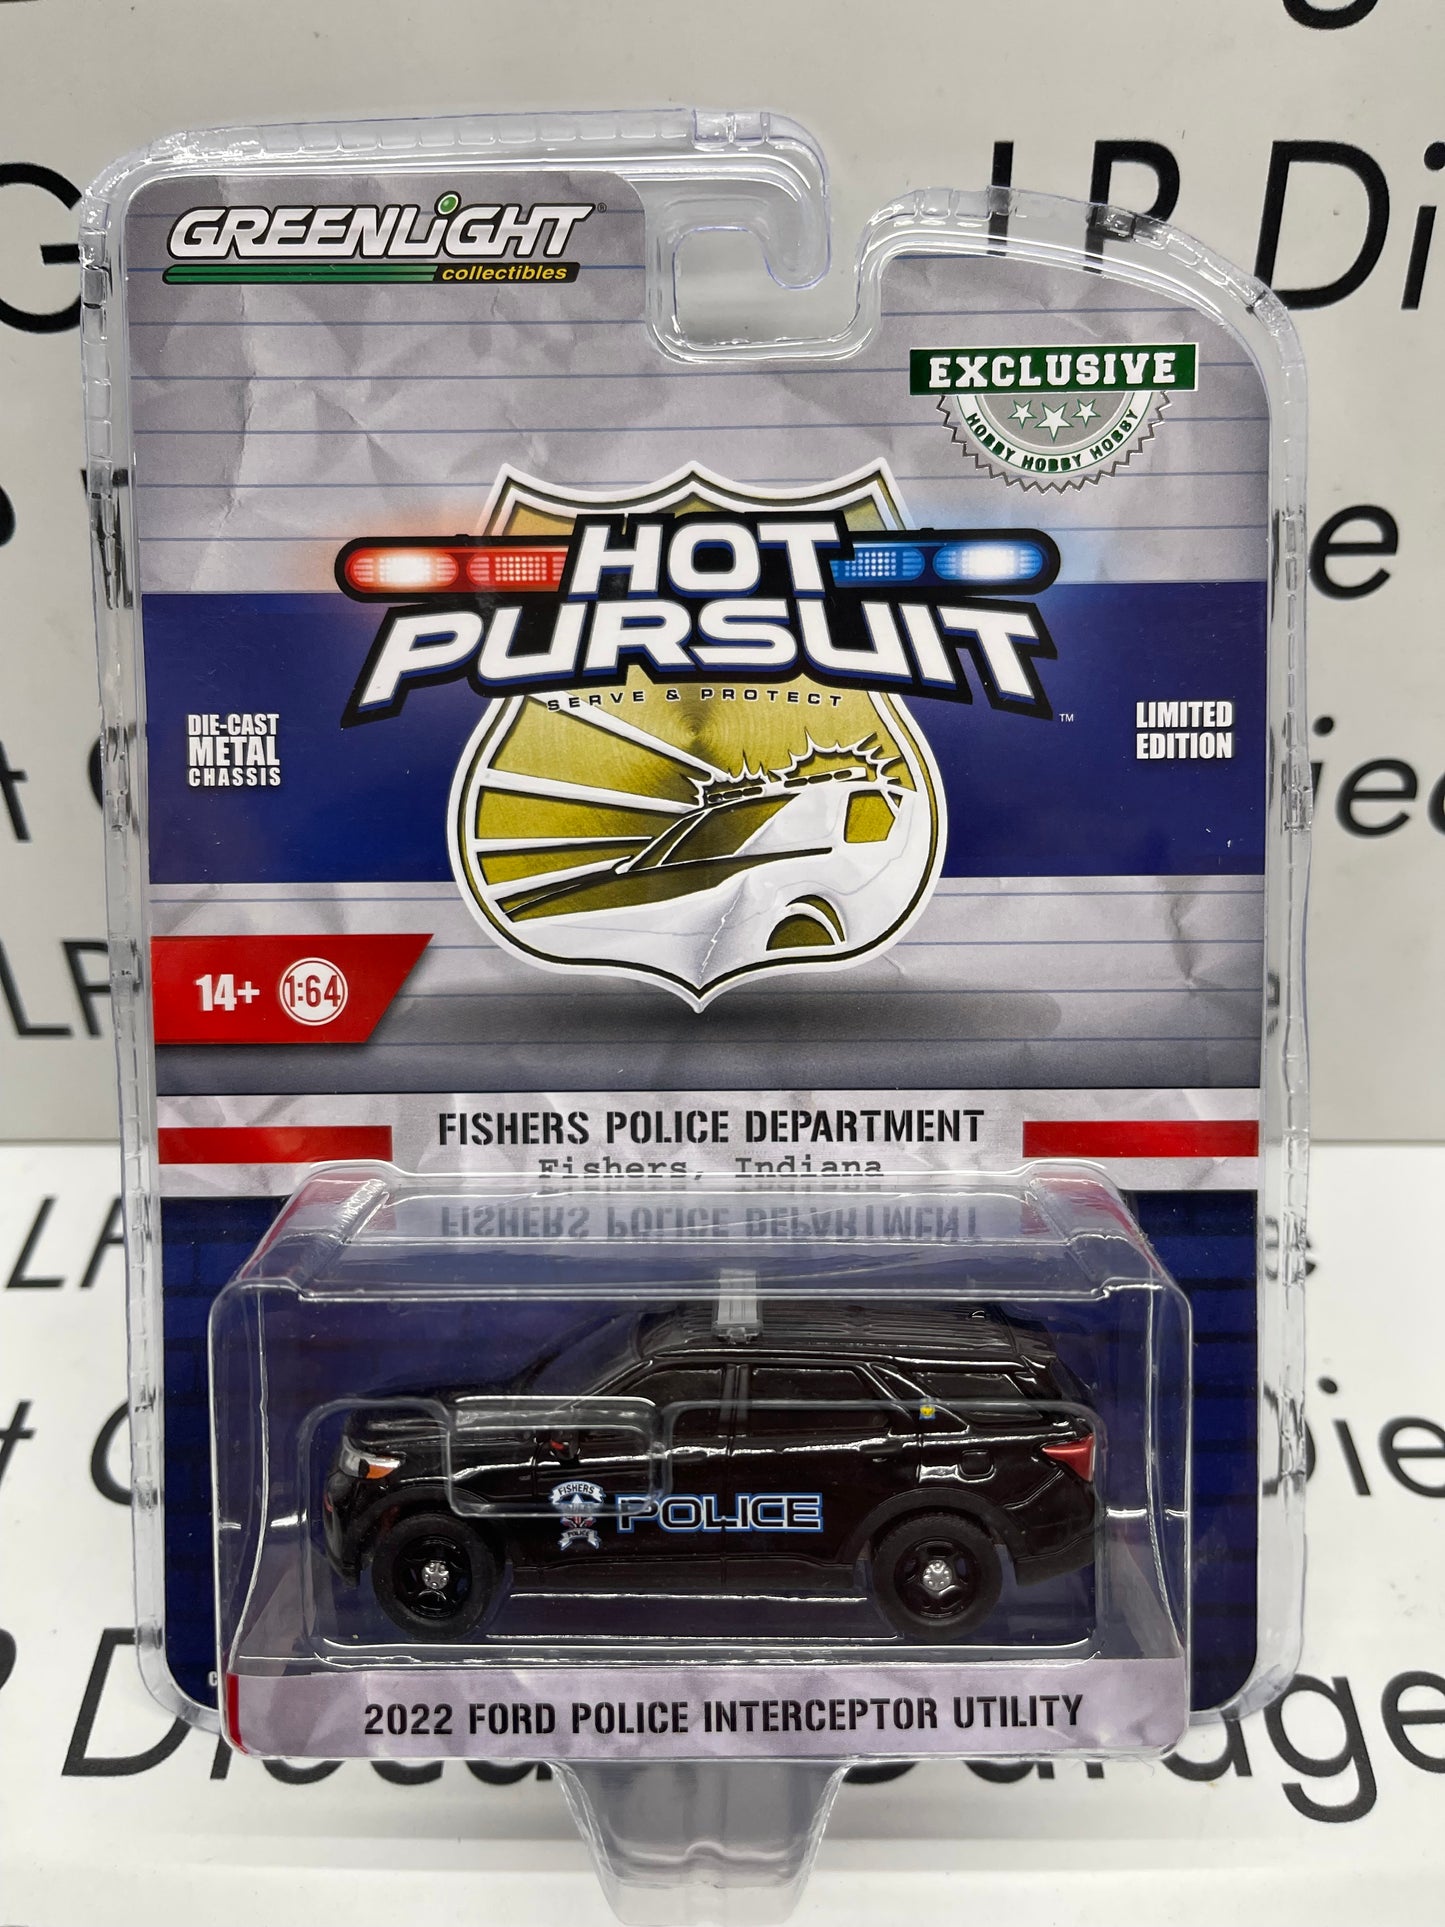 GREENLIGHT 2022 Ford Police Interceptor Fishers Indiana "Hot Pursuit" 1:64 Diecast